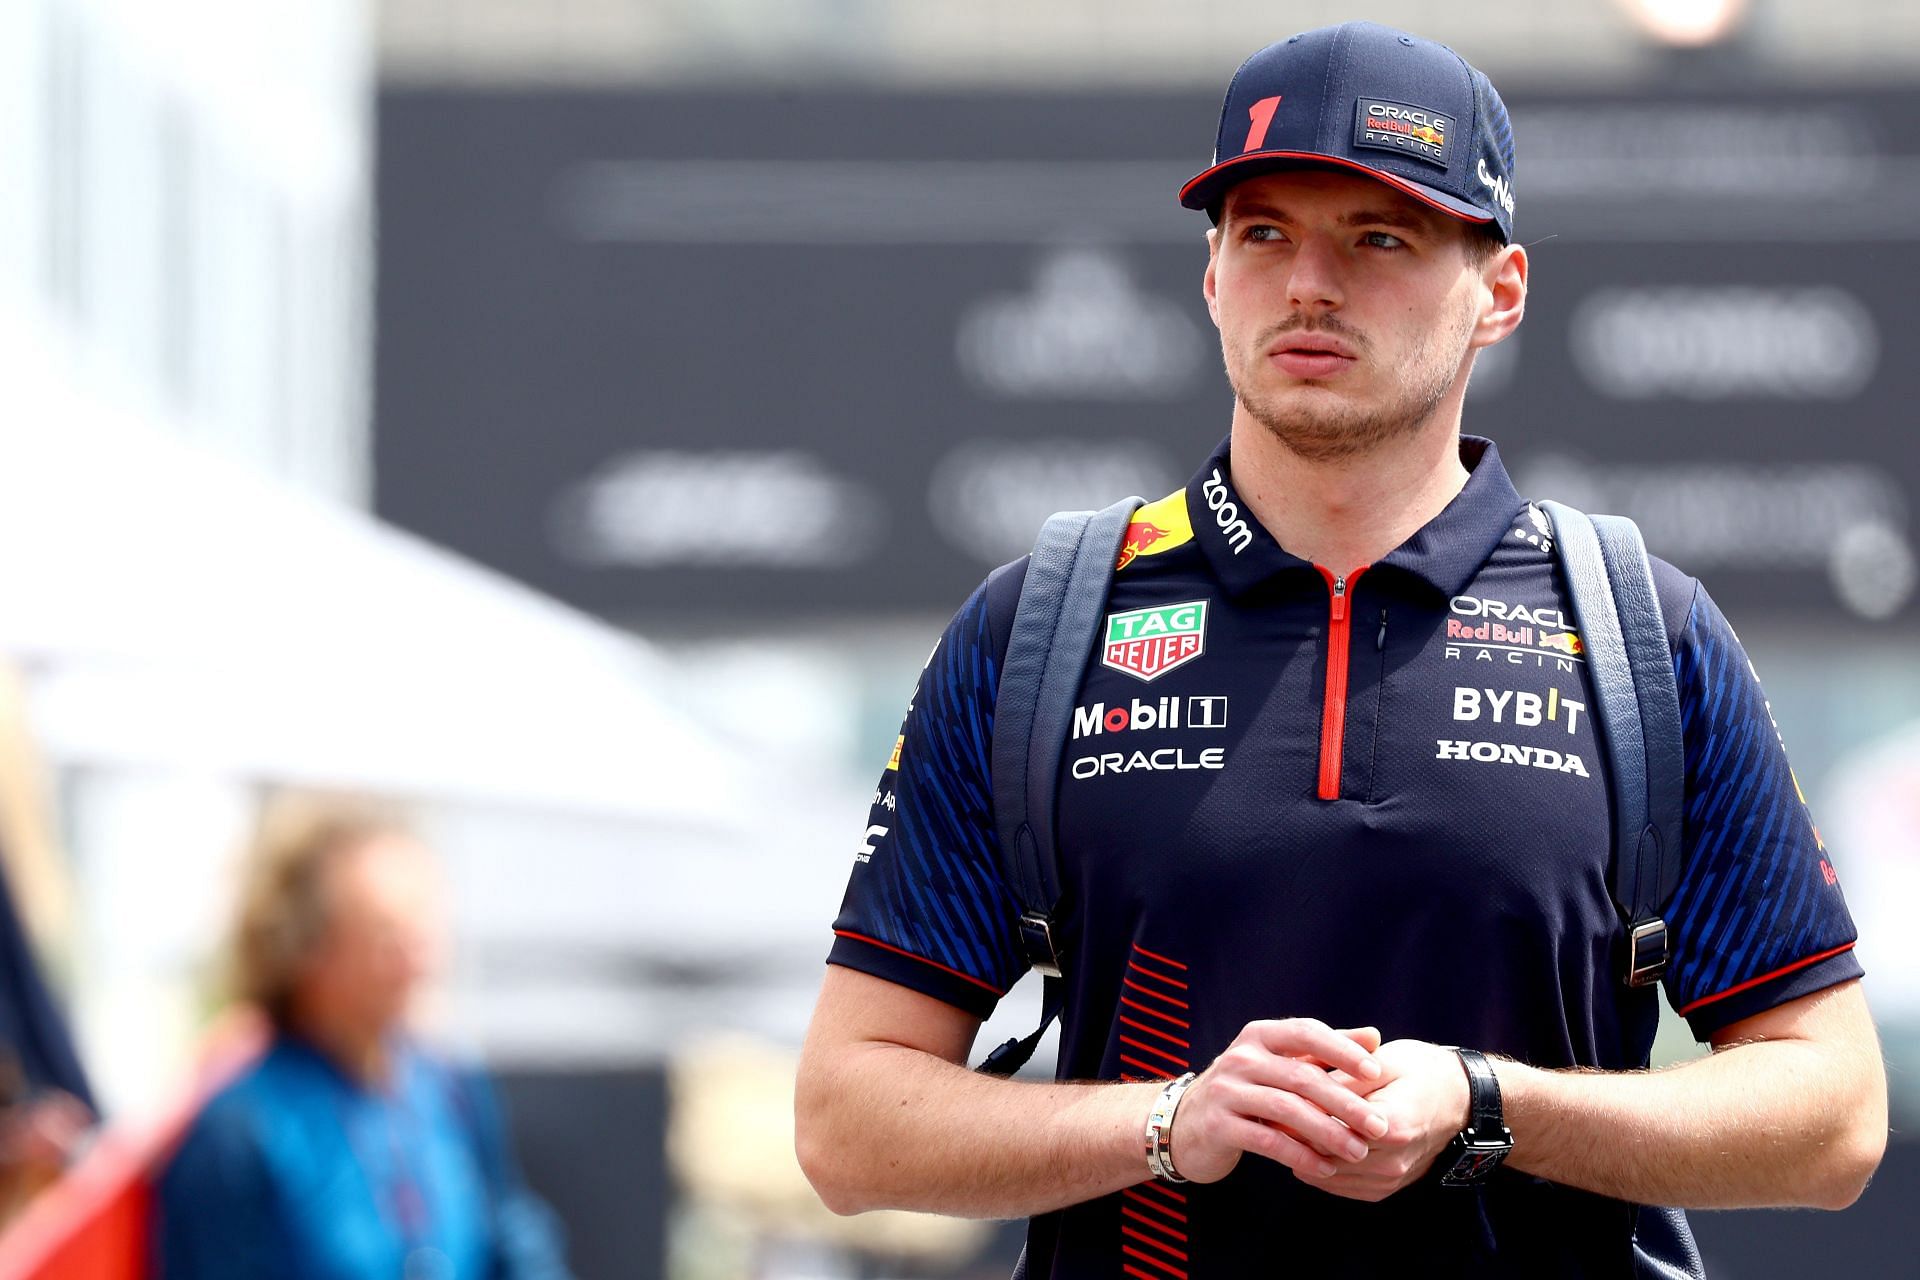 Watch: Max Verstappen's pre-race preparation as the Red Bull driver ...